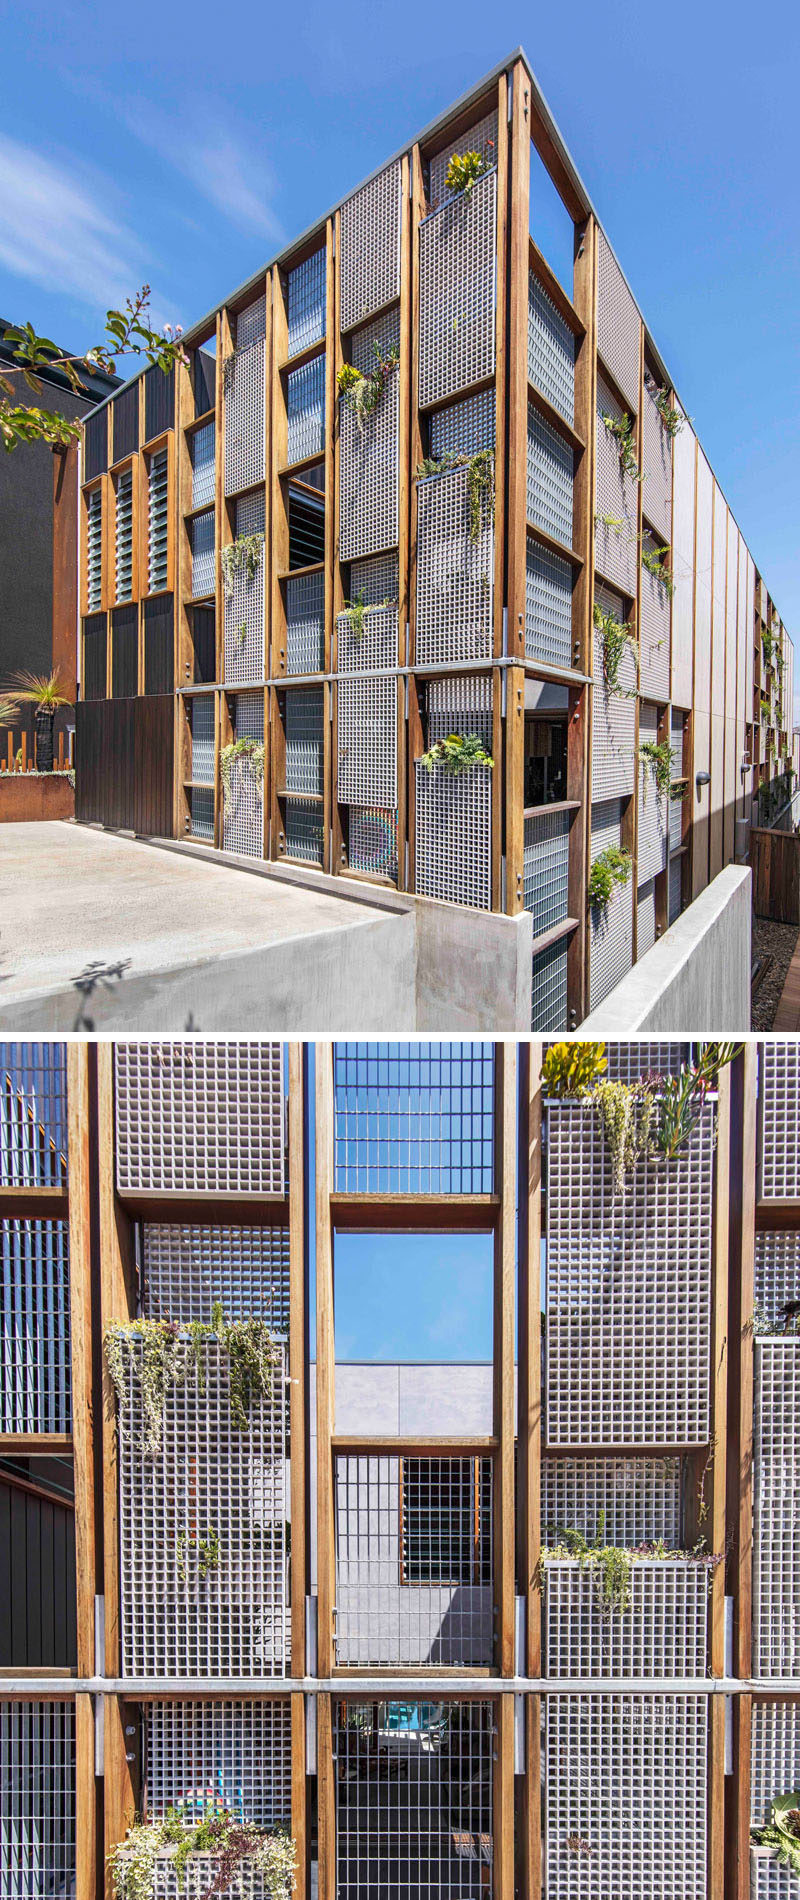 The facade of this modern house is made up of a wood grid with windows and perforated metal panels. These metal panels allow for a vertical garden to be grown over time.